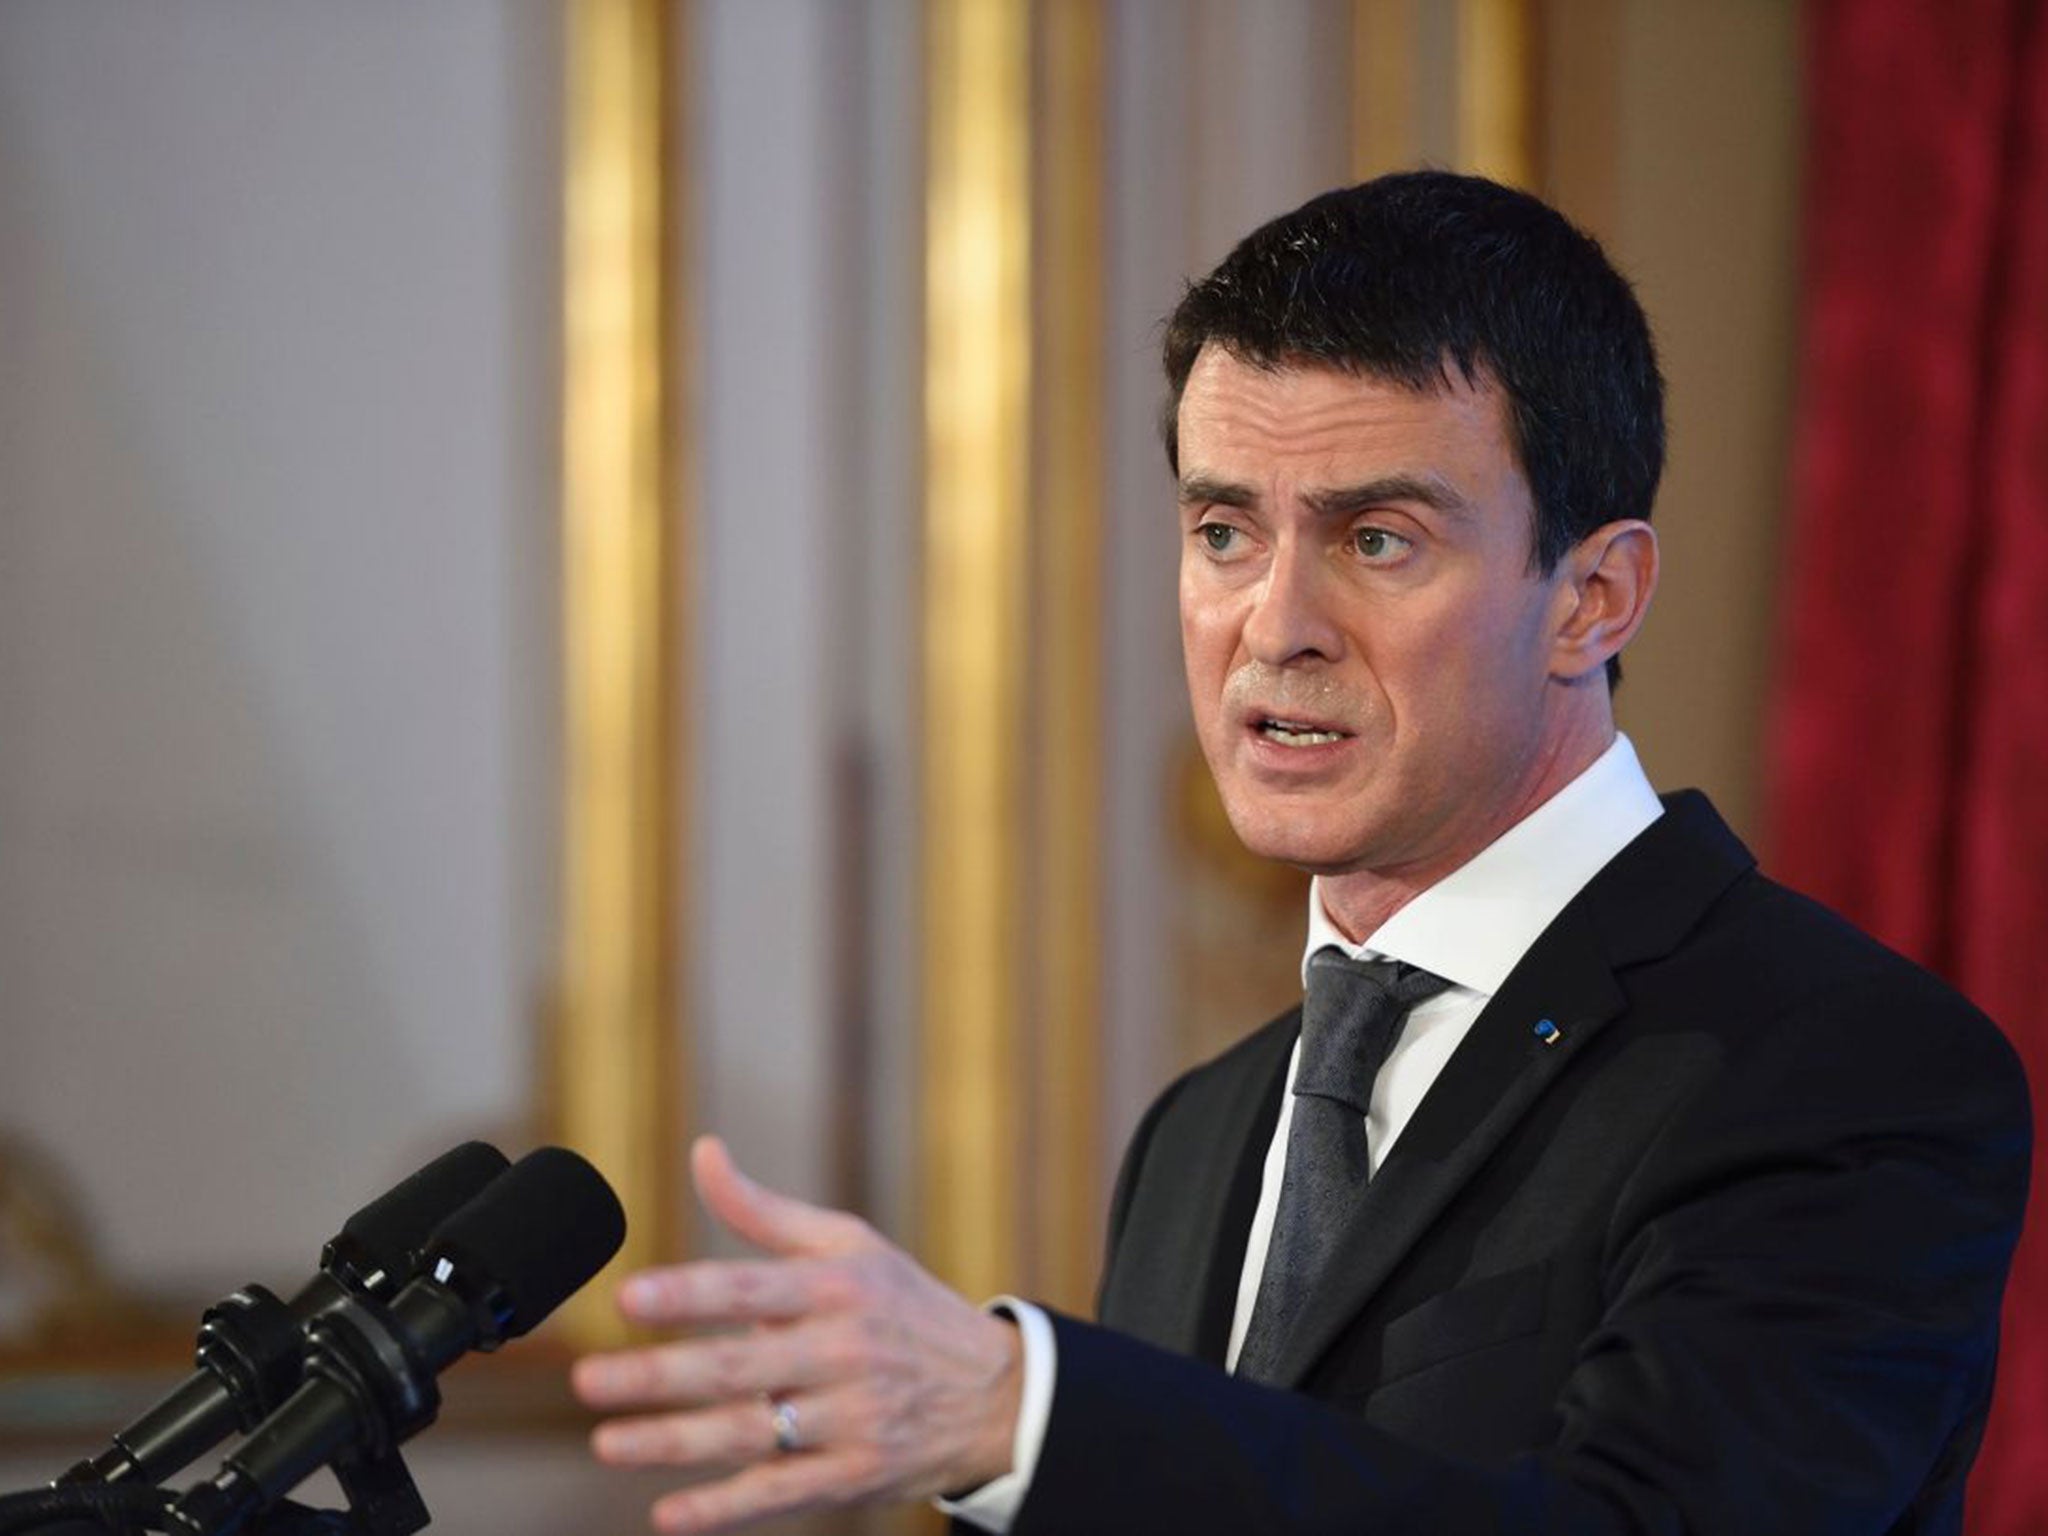 The remarks by Manuel Valls were disowned by other ministers in the centre-left government